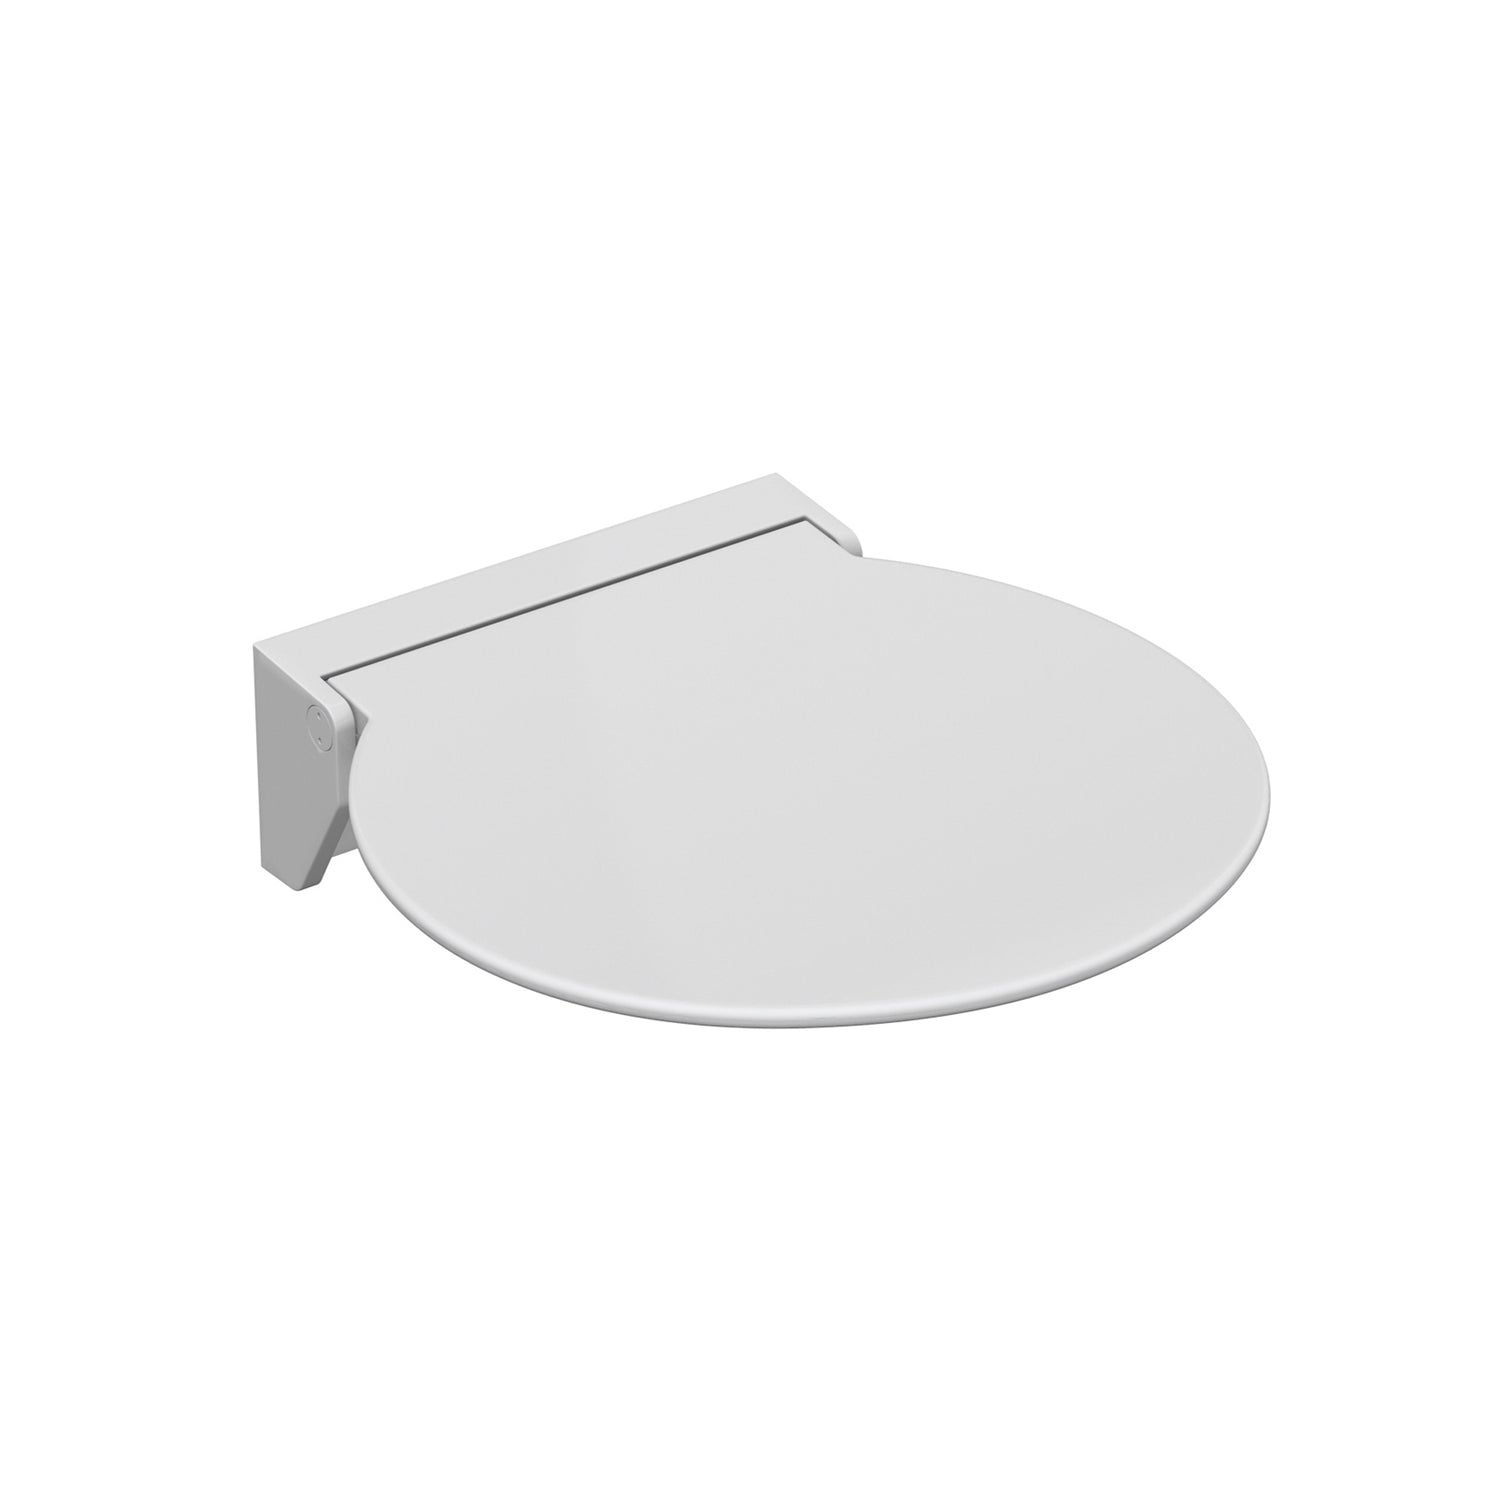 Circula Shower Seat with a white seat and white bracket on a white background